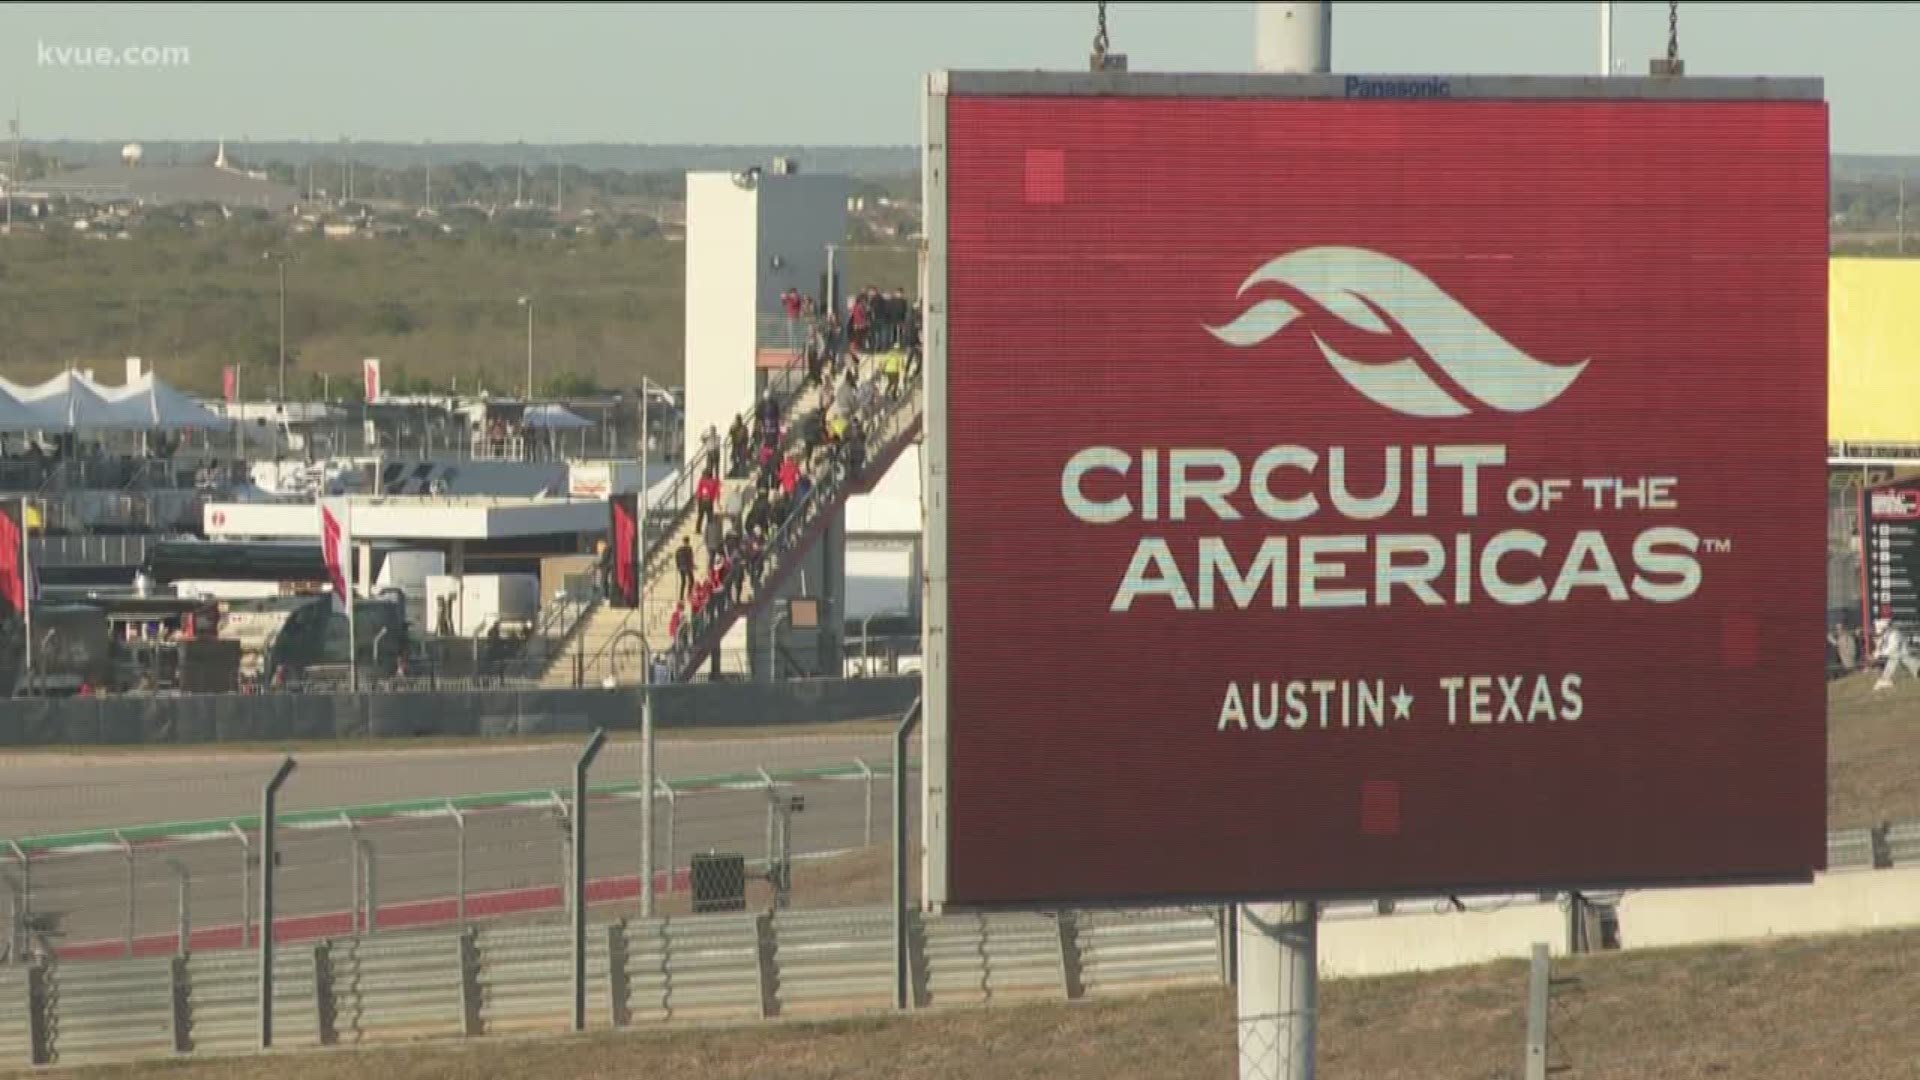 The event brought a sold out crowd to Circuit of the Americas. Cultural reporter, Brittany Flowers, learned there was a lot more to do than just watch the race.